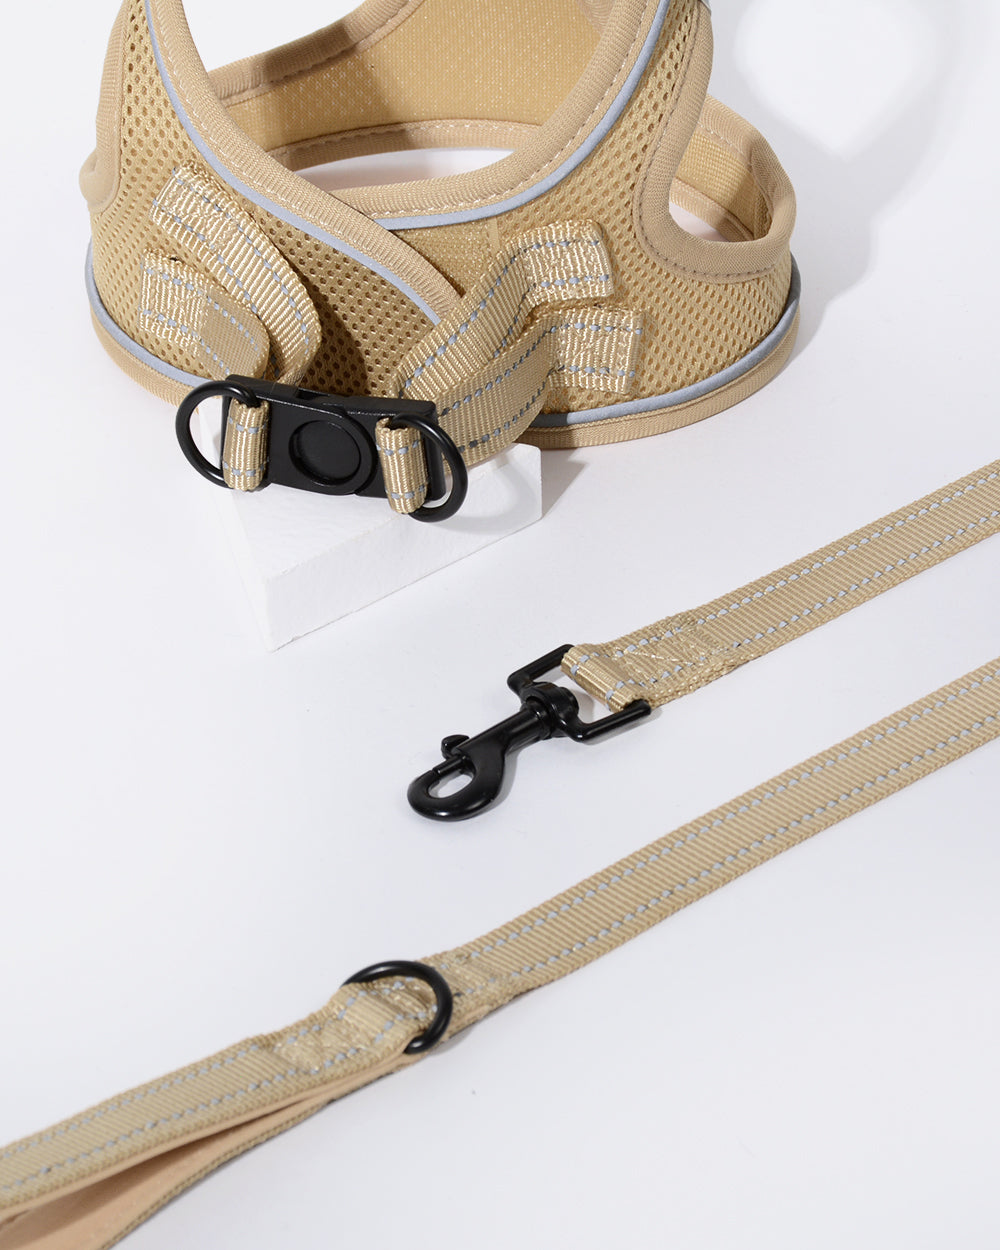 OxyMesh Step-in Harness and Leash Set - Tan